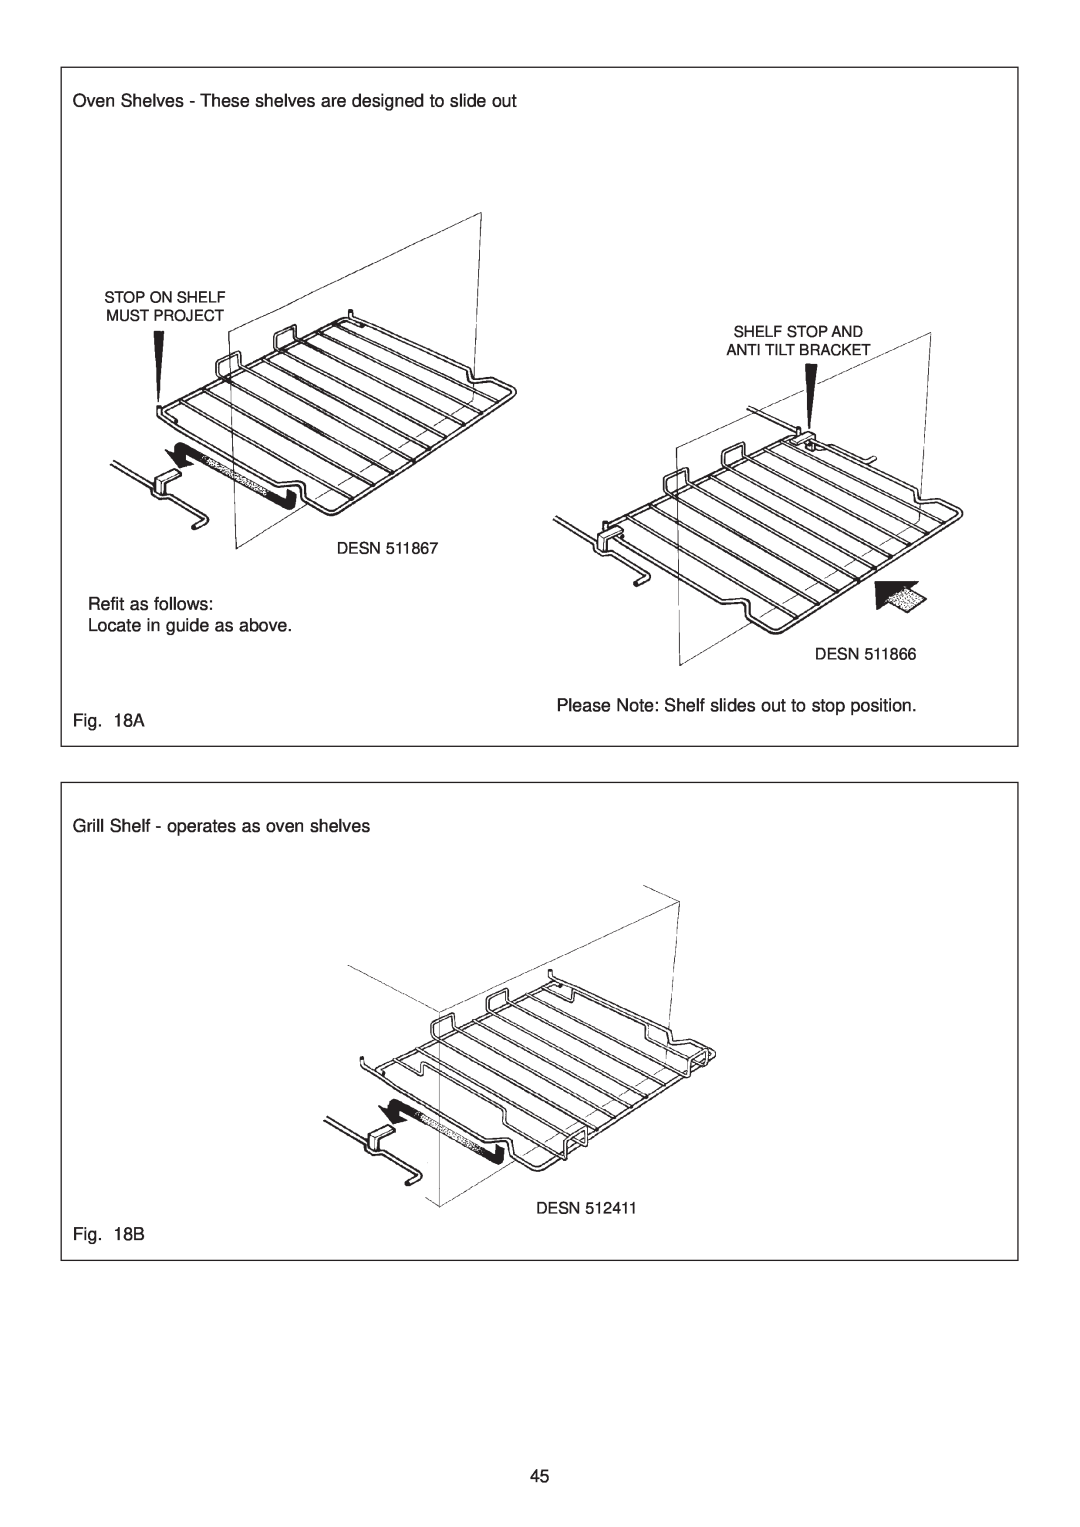 Aga Ranges dc6 Oven Shelves - These shelves are designed to slide out, Refit as follows Locate in guide as above, A, B 